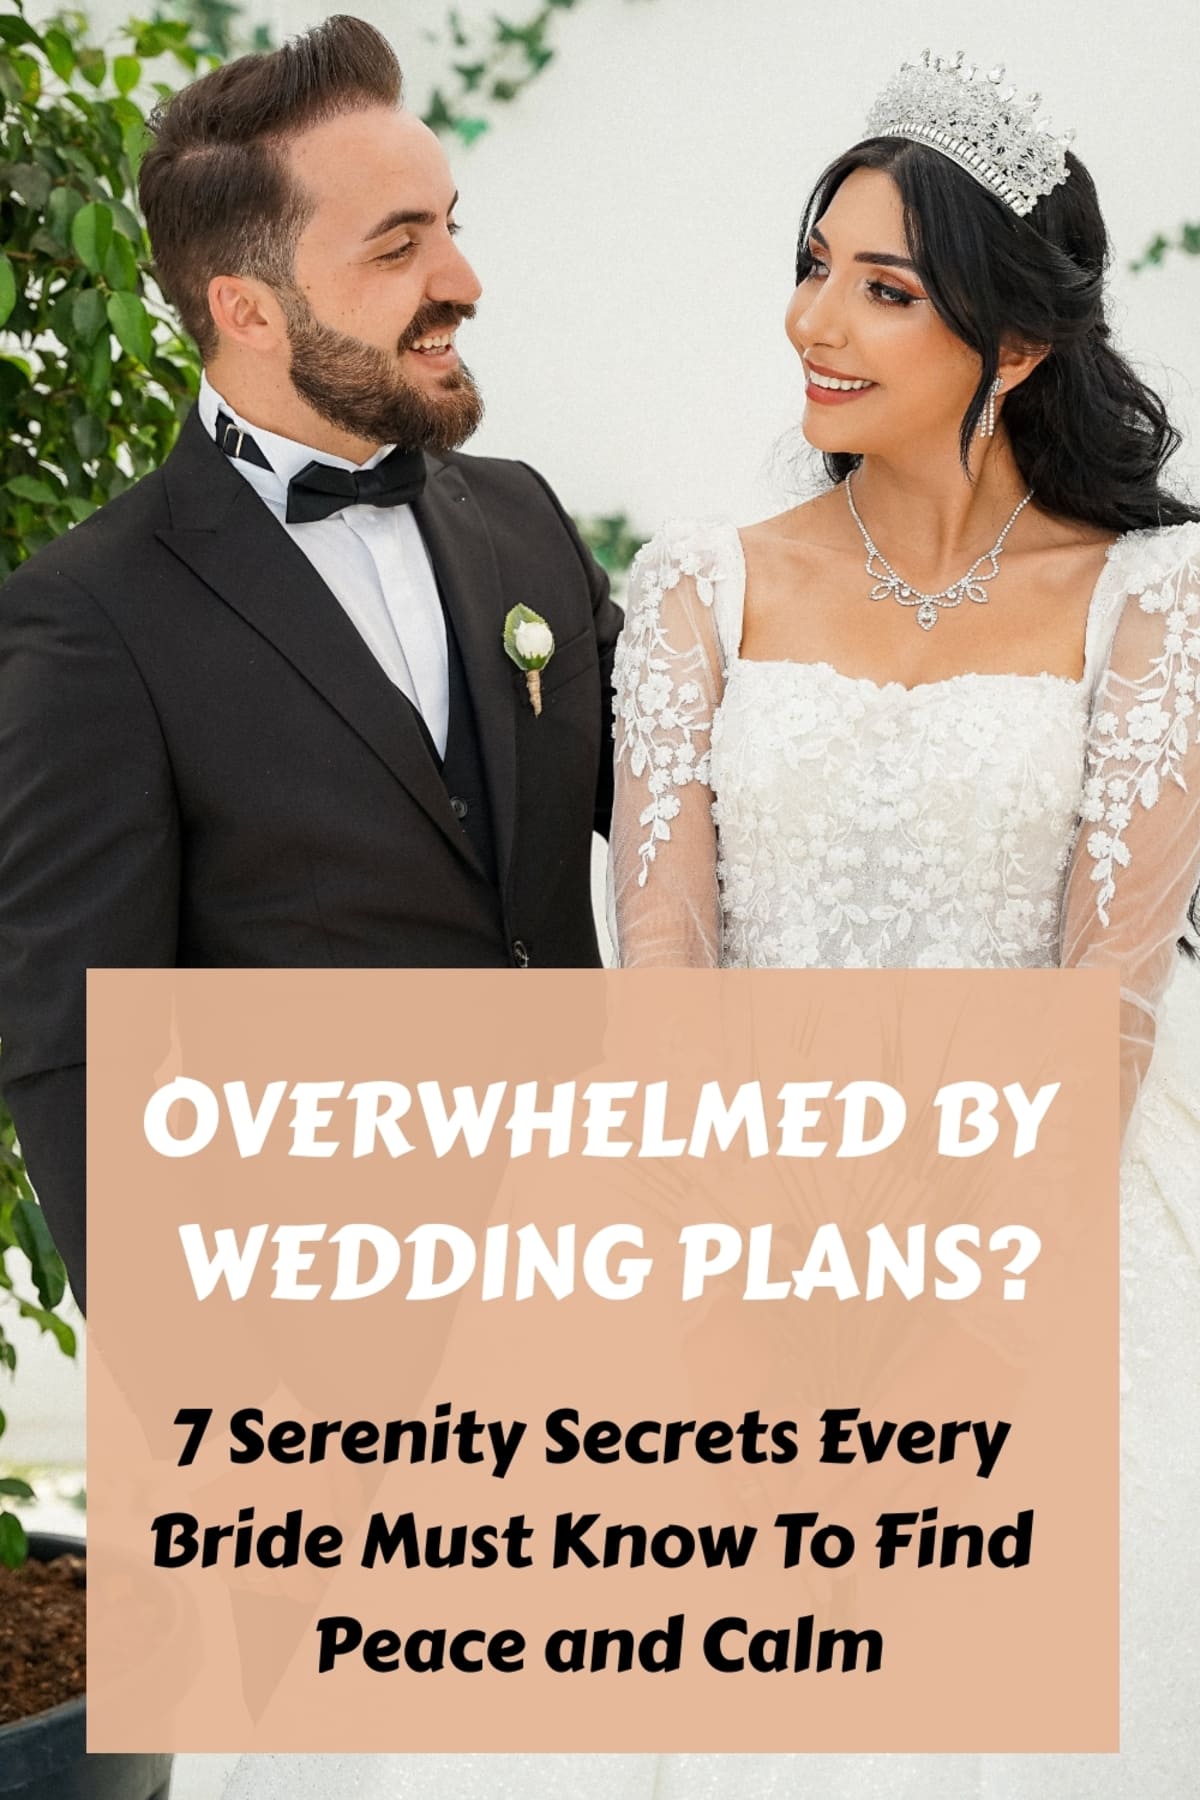 7 Serenity Secrets Every Bride Must Know To Find Peace and Calm